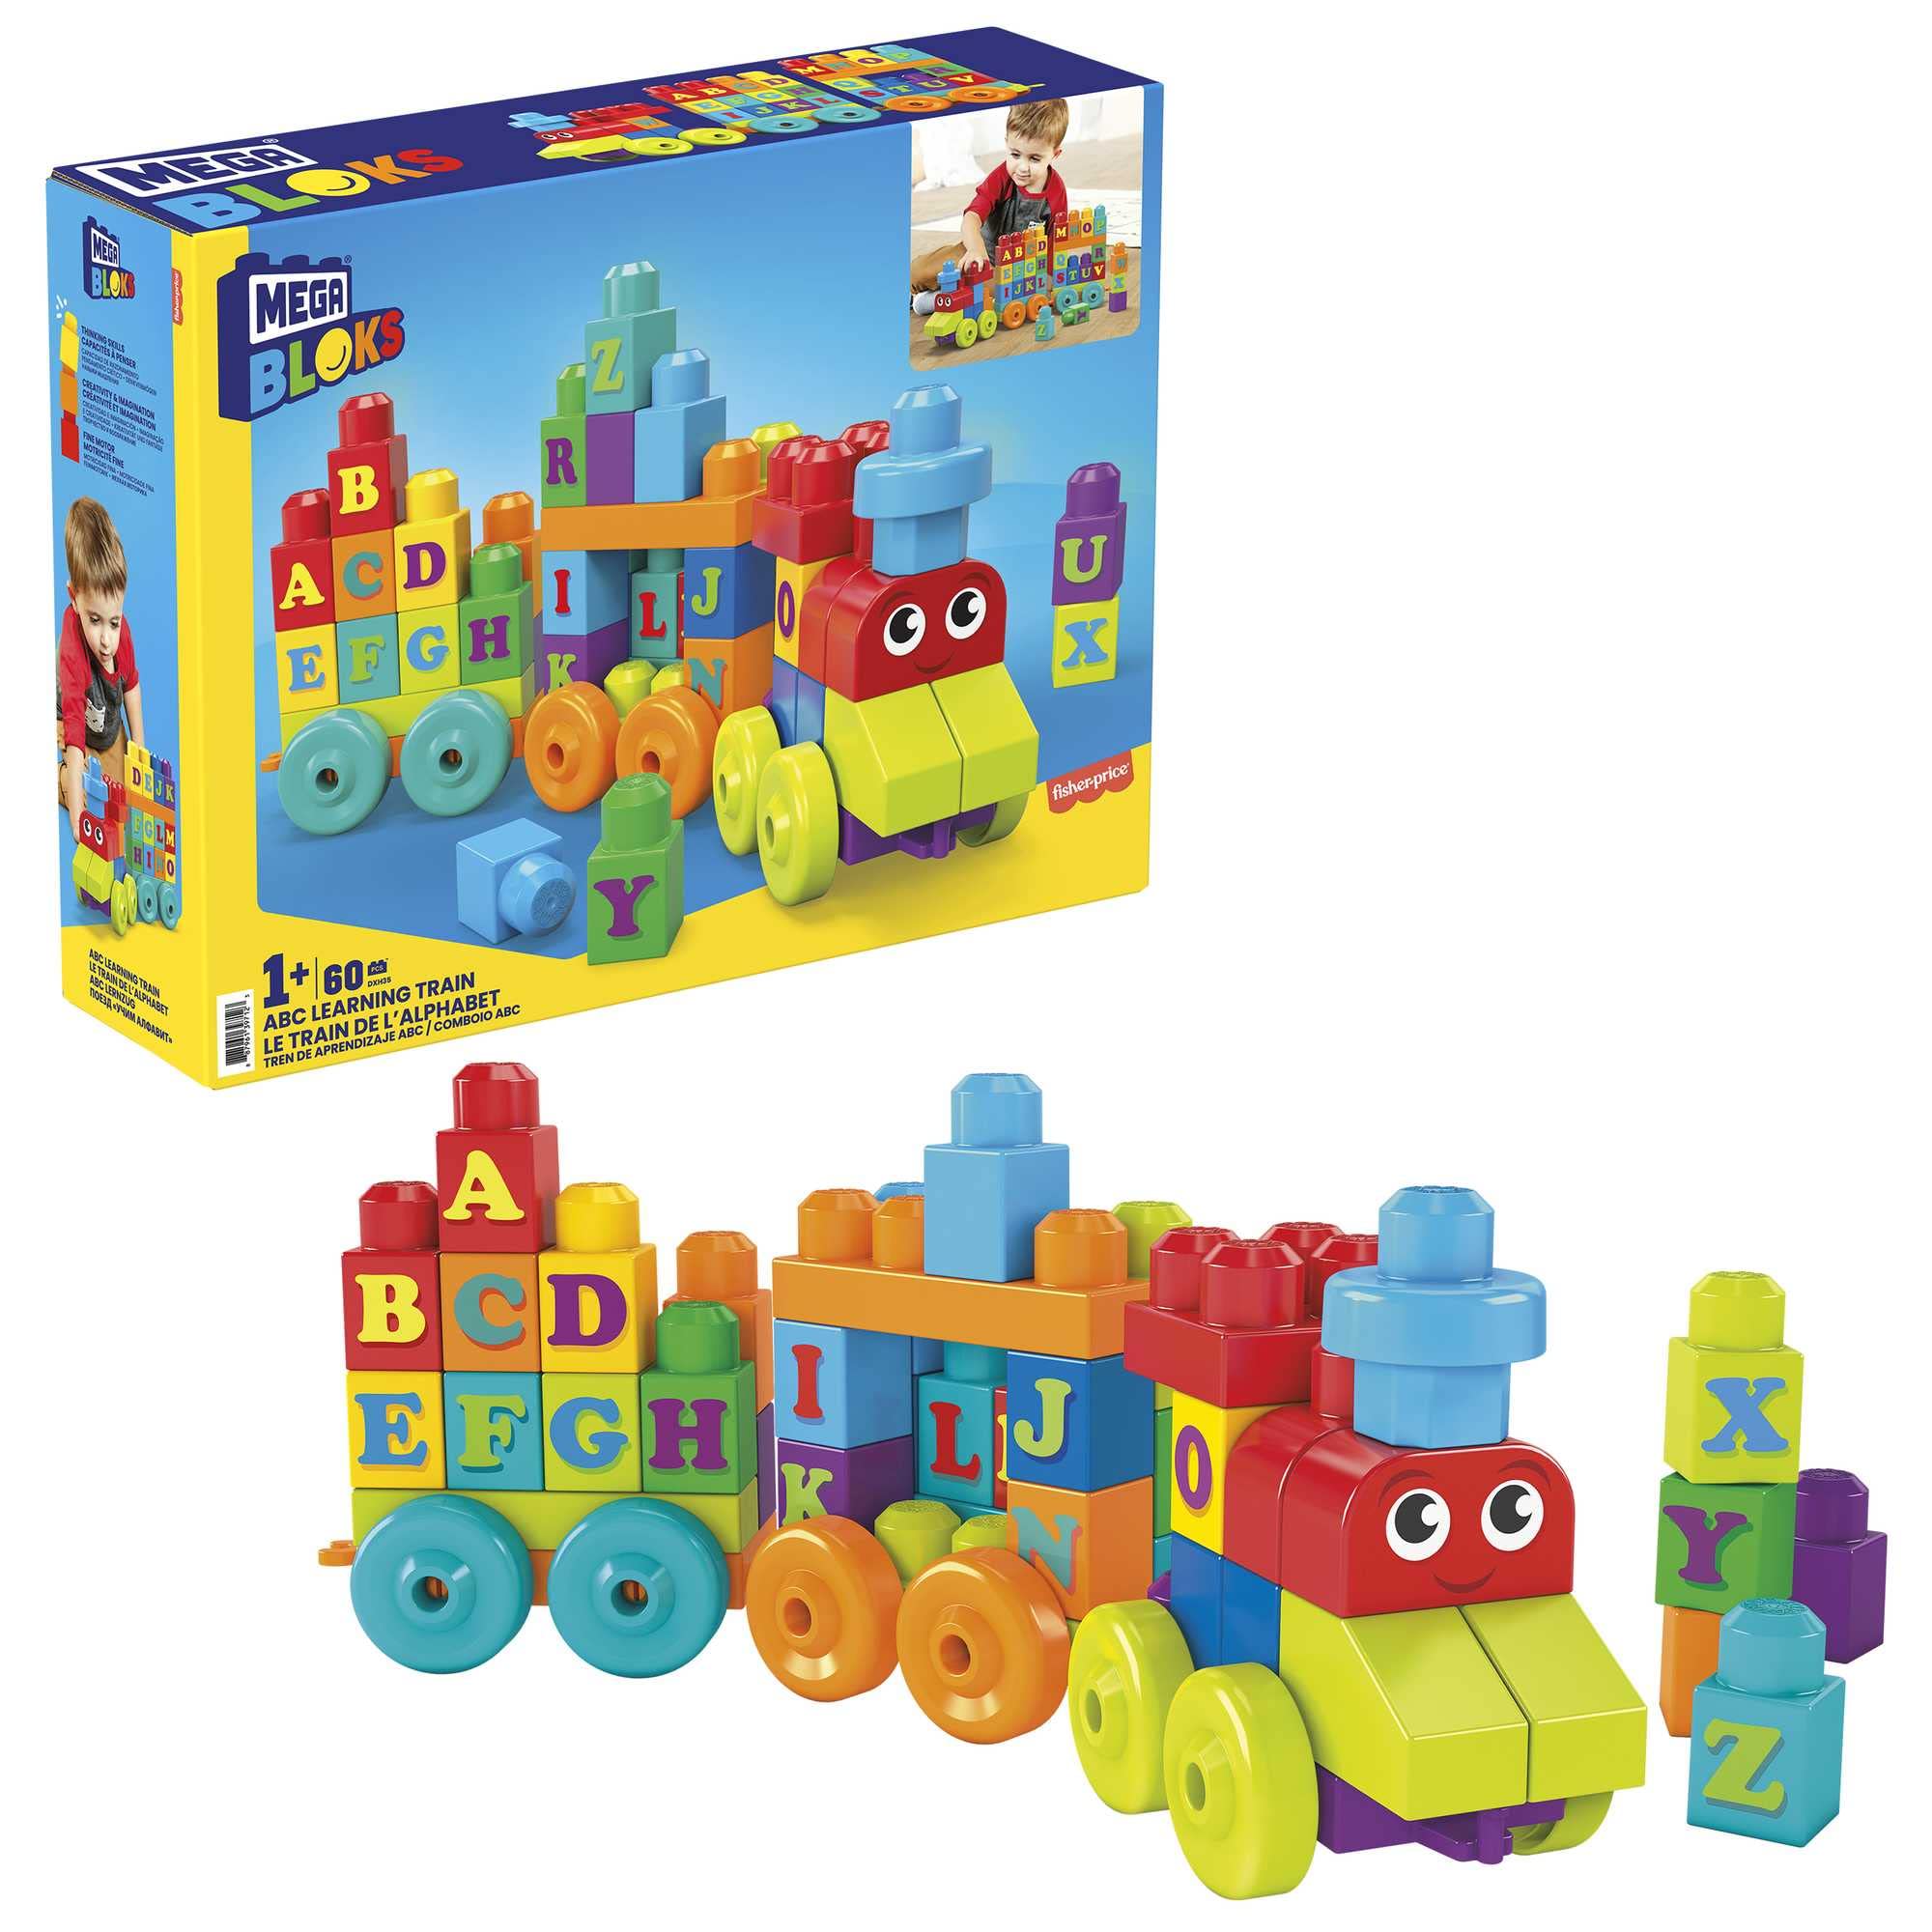 MEGA BLOKS Fisher-Price ABC Blocks Building Toy, ABC Learning Train with 60 Pieces for Toddlers, Gift Ideas for Kids Age 1+ Years (Amazon Exclusive)